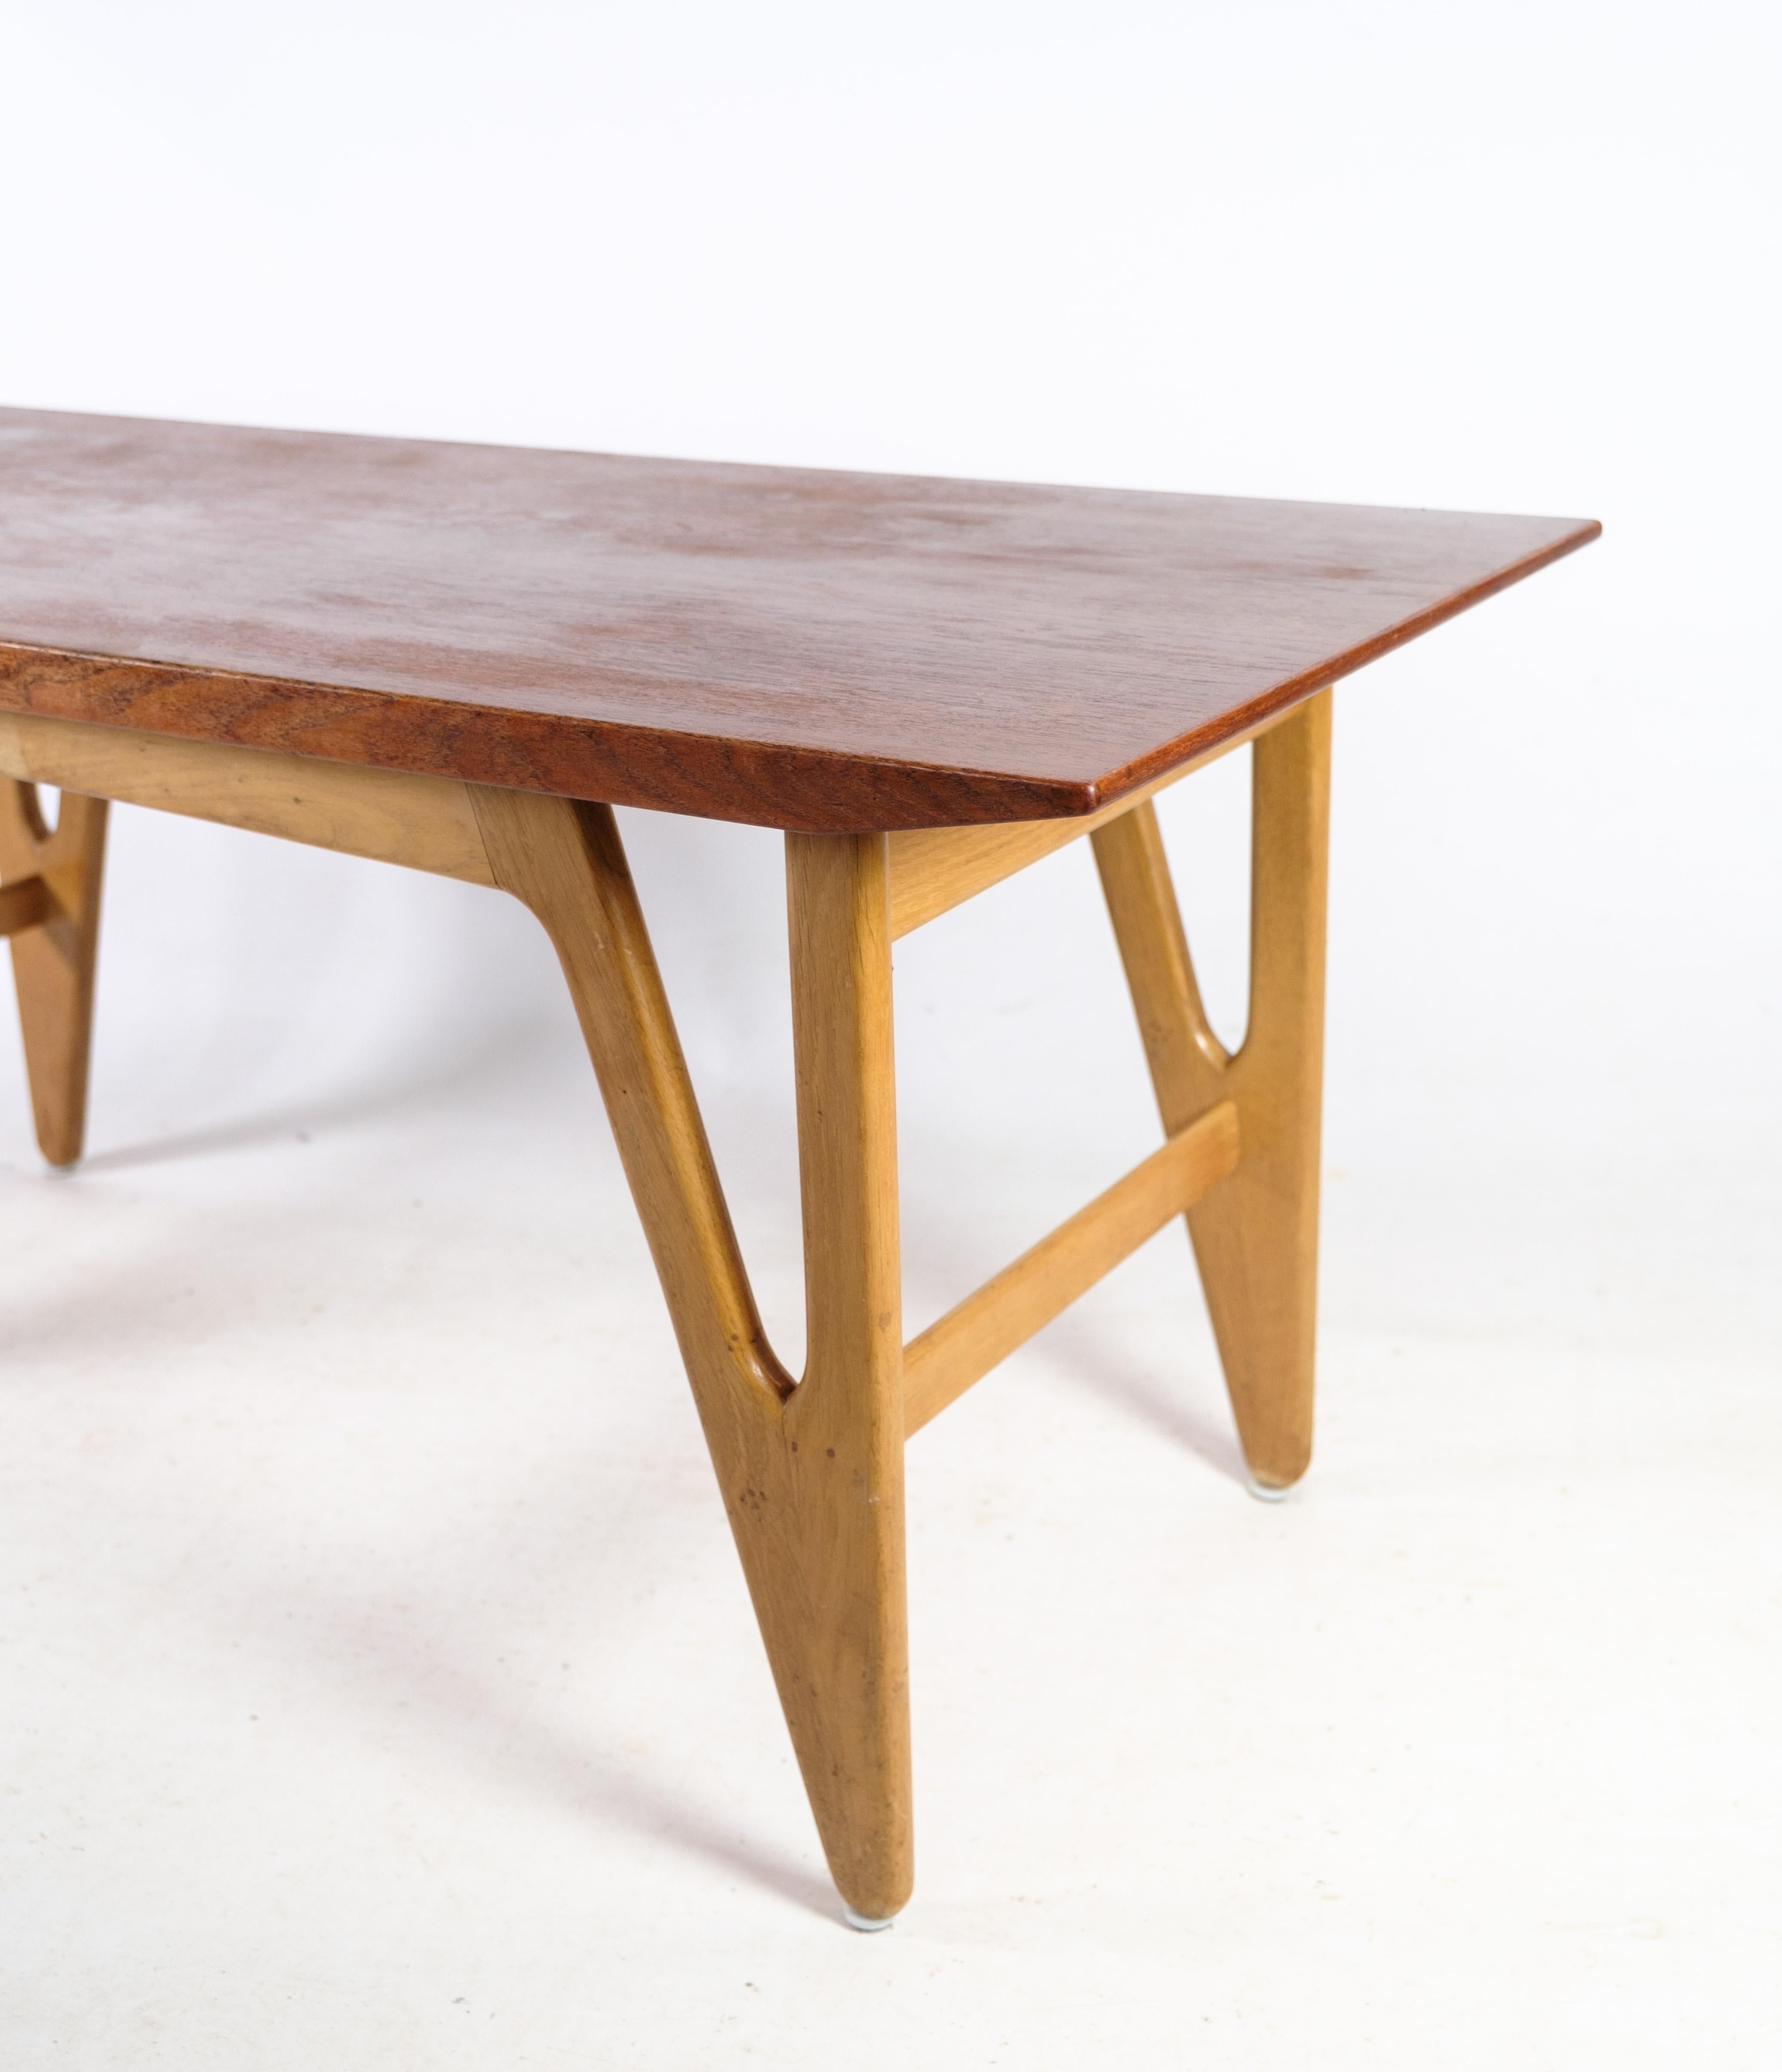 Mid-20th Century Coffee table Made In Teak & Oak, Danish design From 1960 For Sale